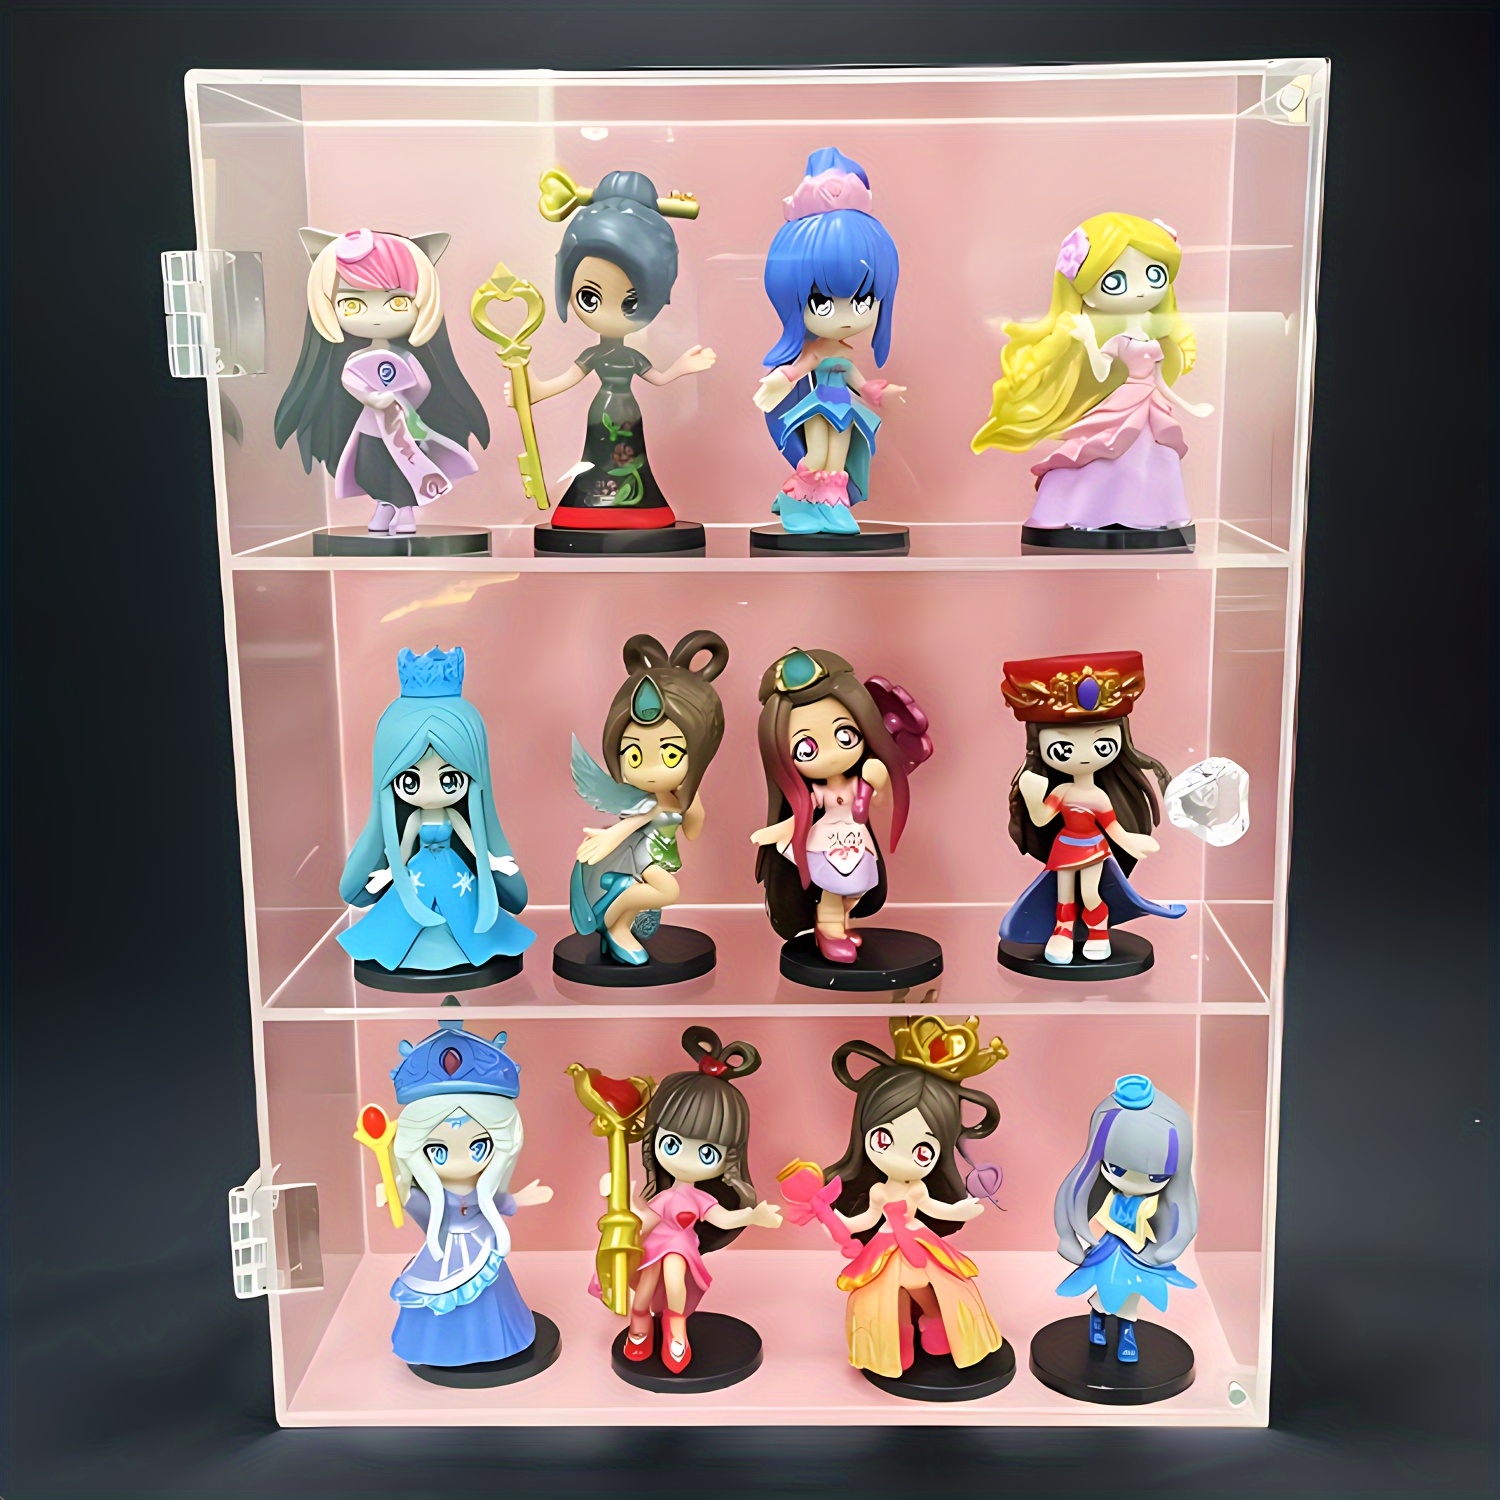 1pc acrylic dustproof display box cabinet anime model display rack storage box for home room living room office decor for valentines day new year easter party decor